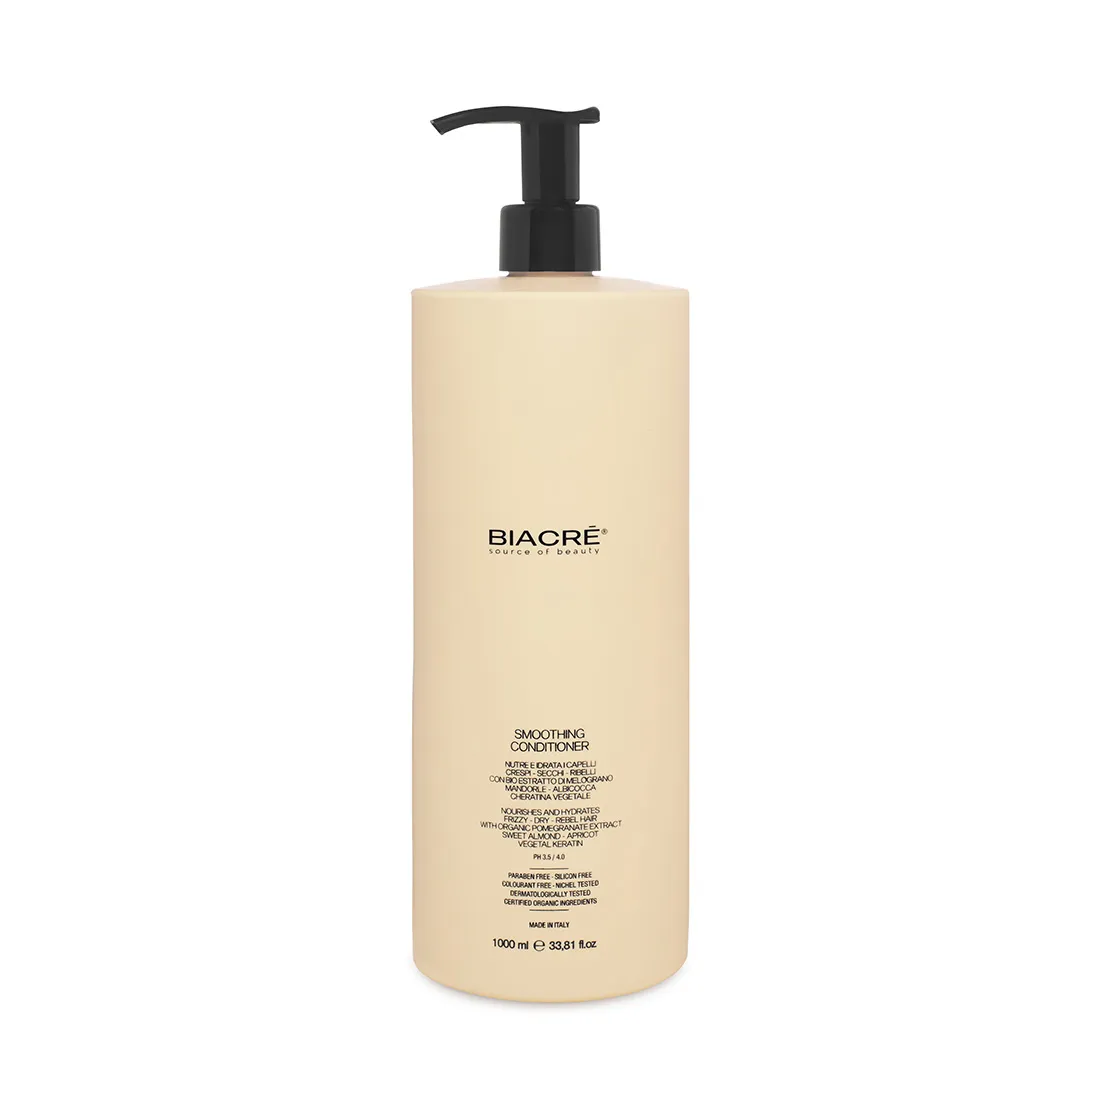 Biacrè Smoothing Conditioner siluv palsam 1000ml